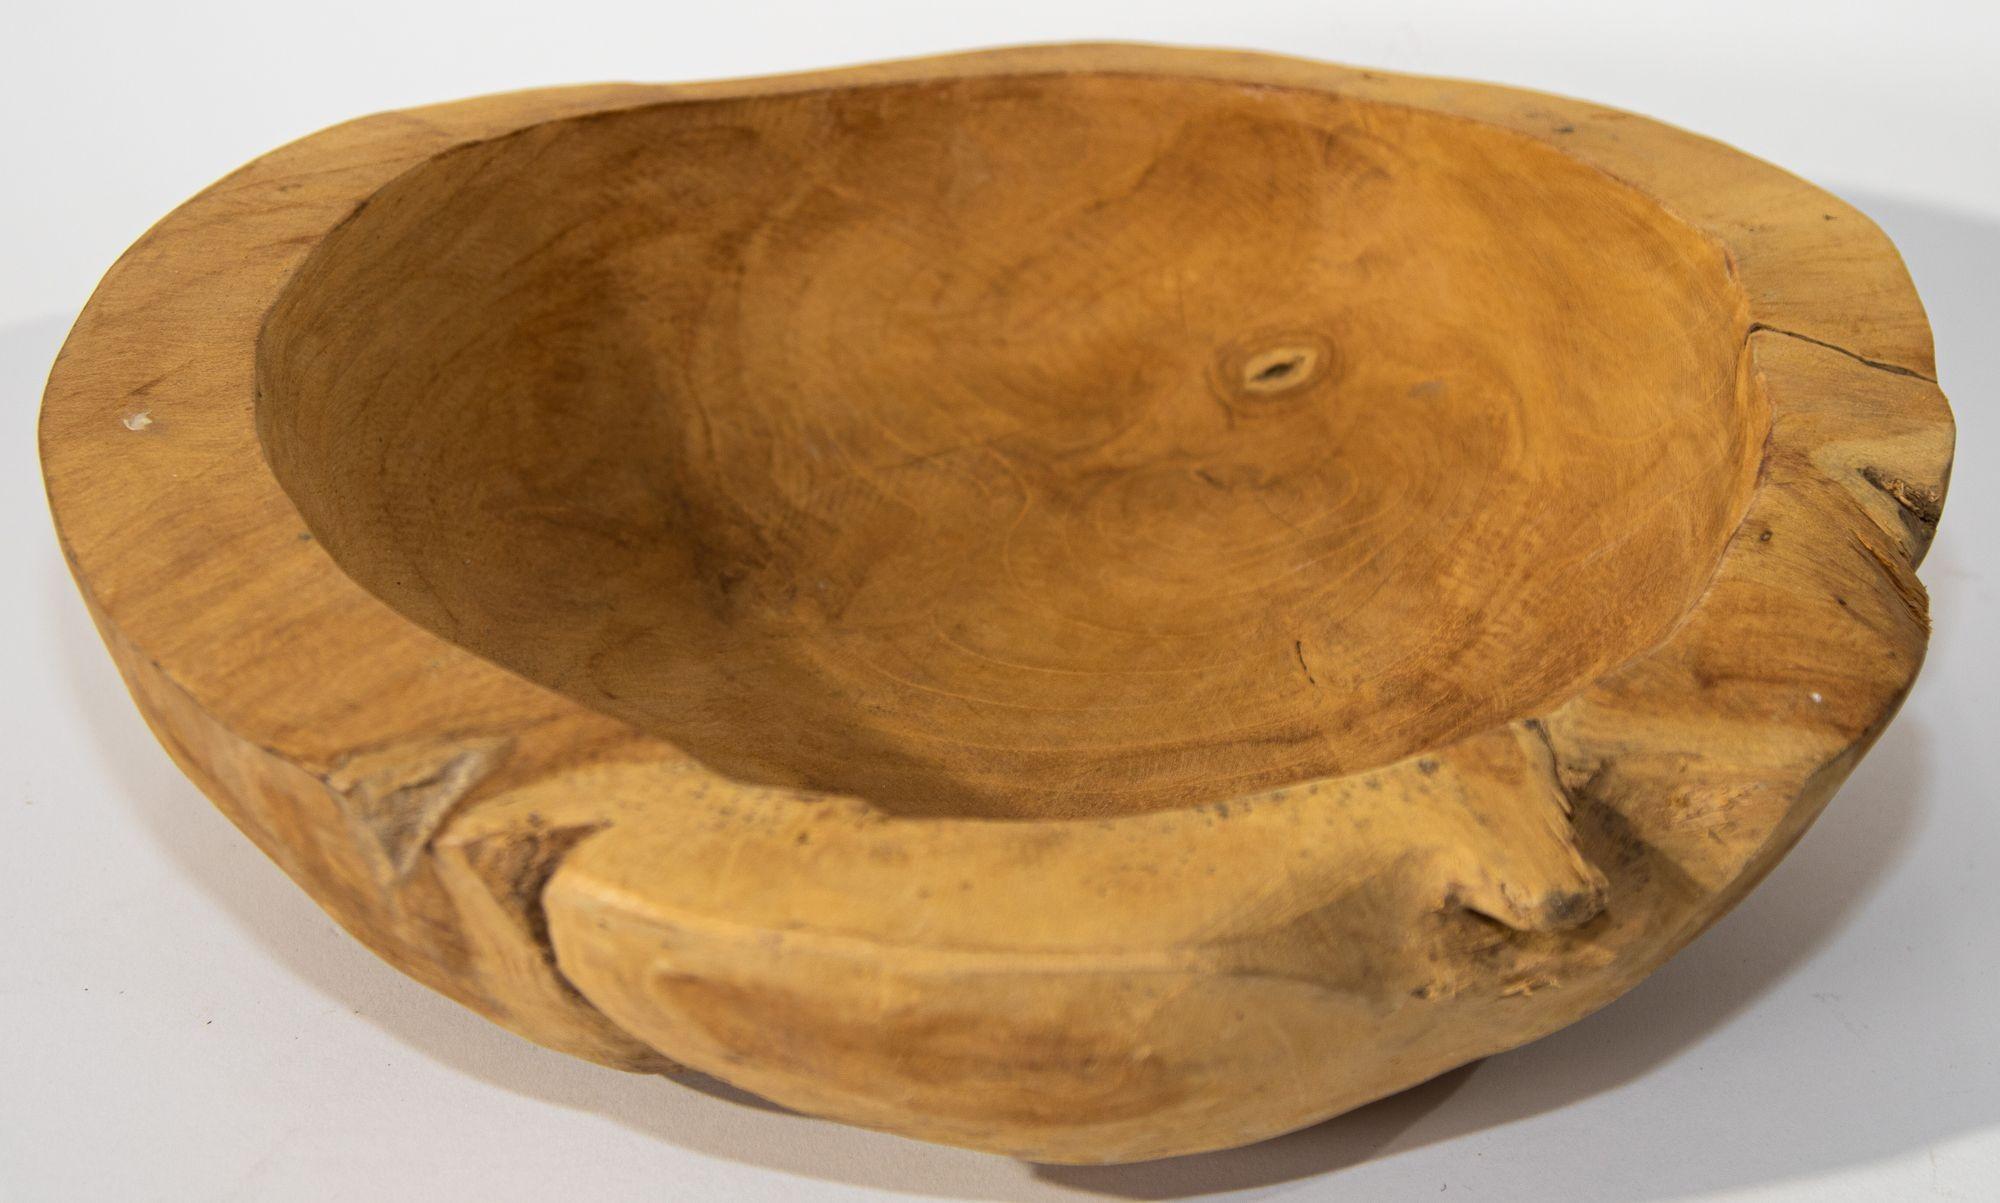 Organic teak root wood hand carved fruit bowl.
Vintage organic bowl made of teak wood, a wonderful addition to the kitchen or Living room.
Can be used as a fruit bowl, or as planter or just as an amazing organic modern decorative piece.